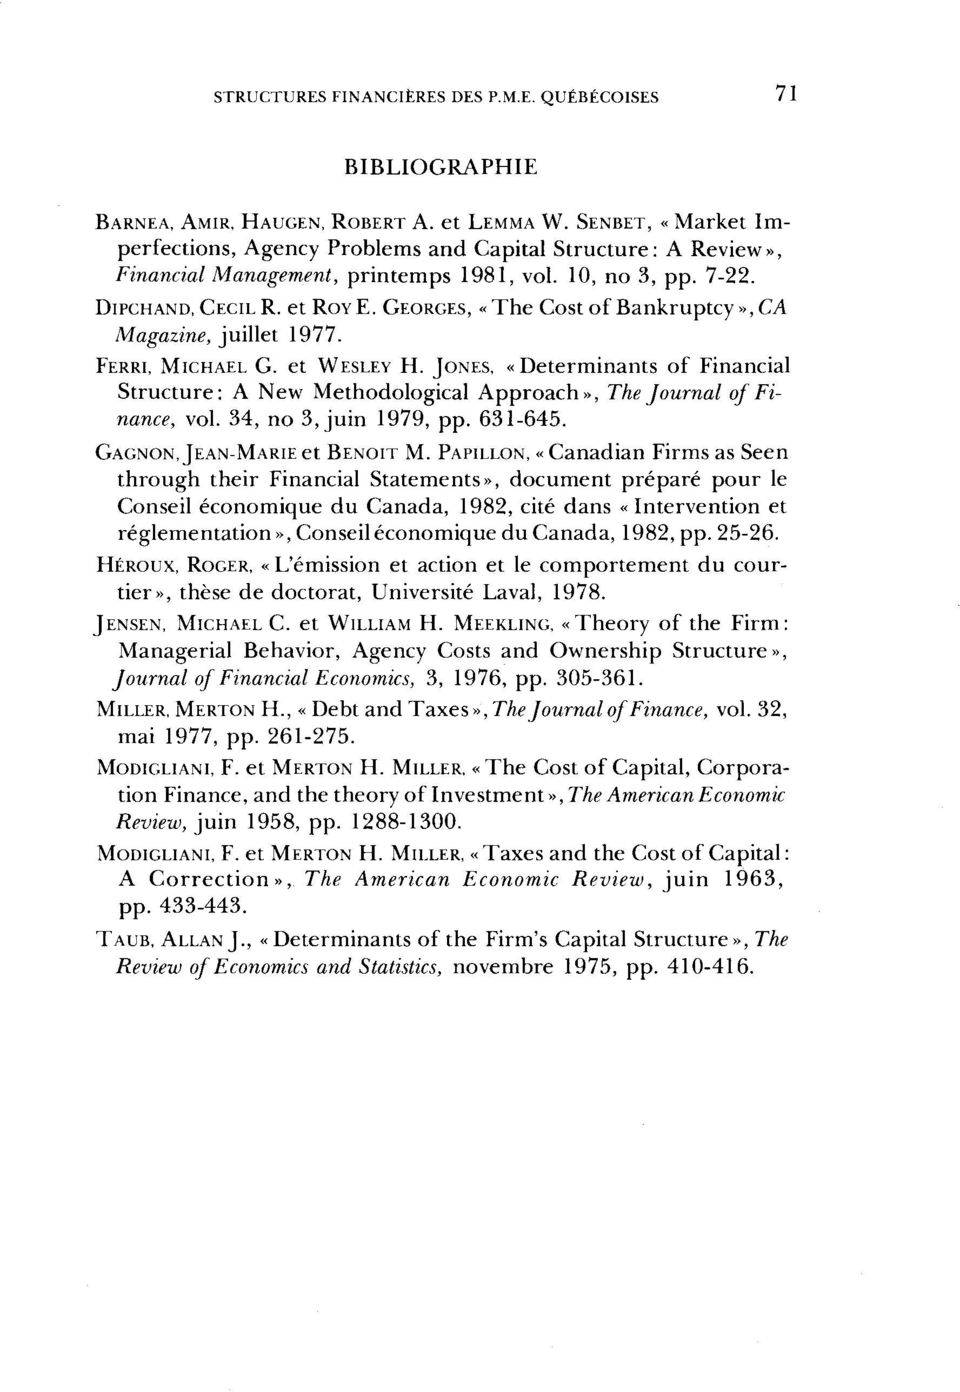 GEORGES, «The Costof Bankruptcy»,CA Magazine, juillet 1977. FERRI, MICHAEL G. et WESLEY H. JONES, «Déterminants of Financial Structure: A New Methodological Approach», The Journal of Finance, vol.